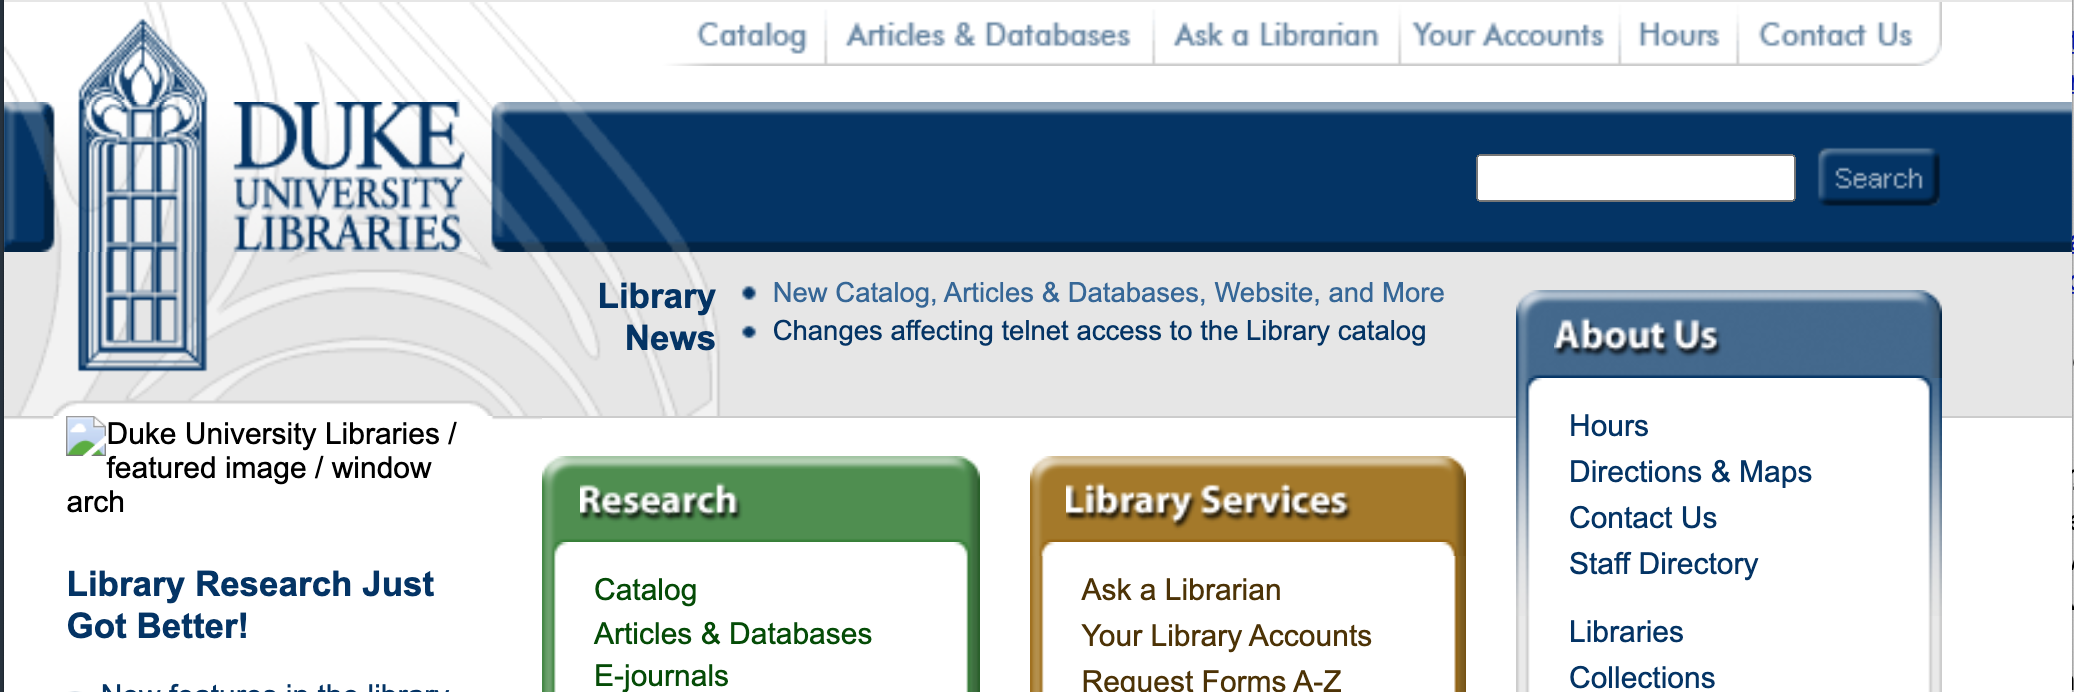 2004 version of the library website, with a Google search box in the masthead.